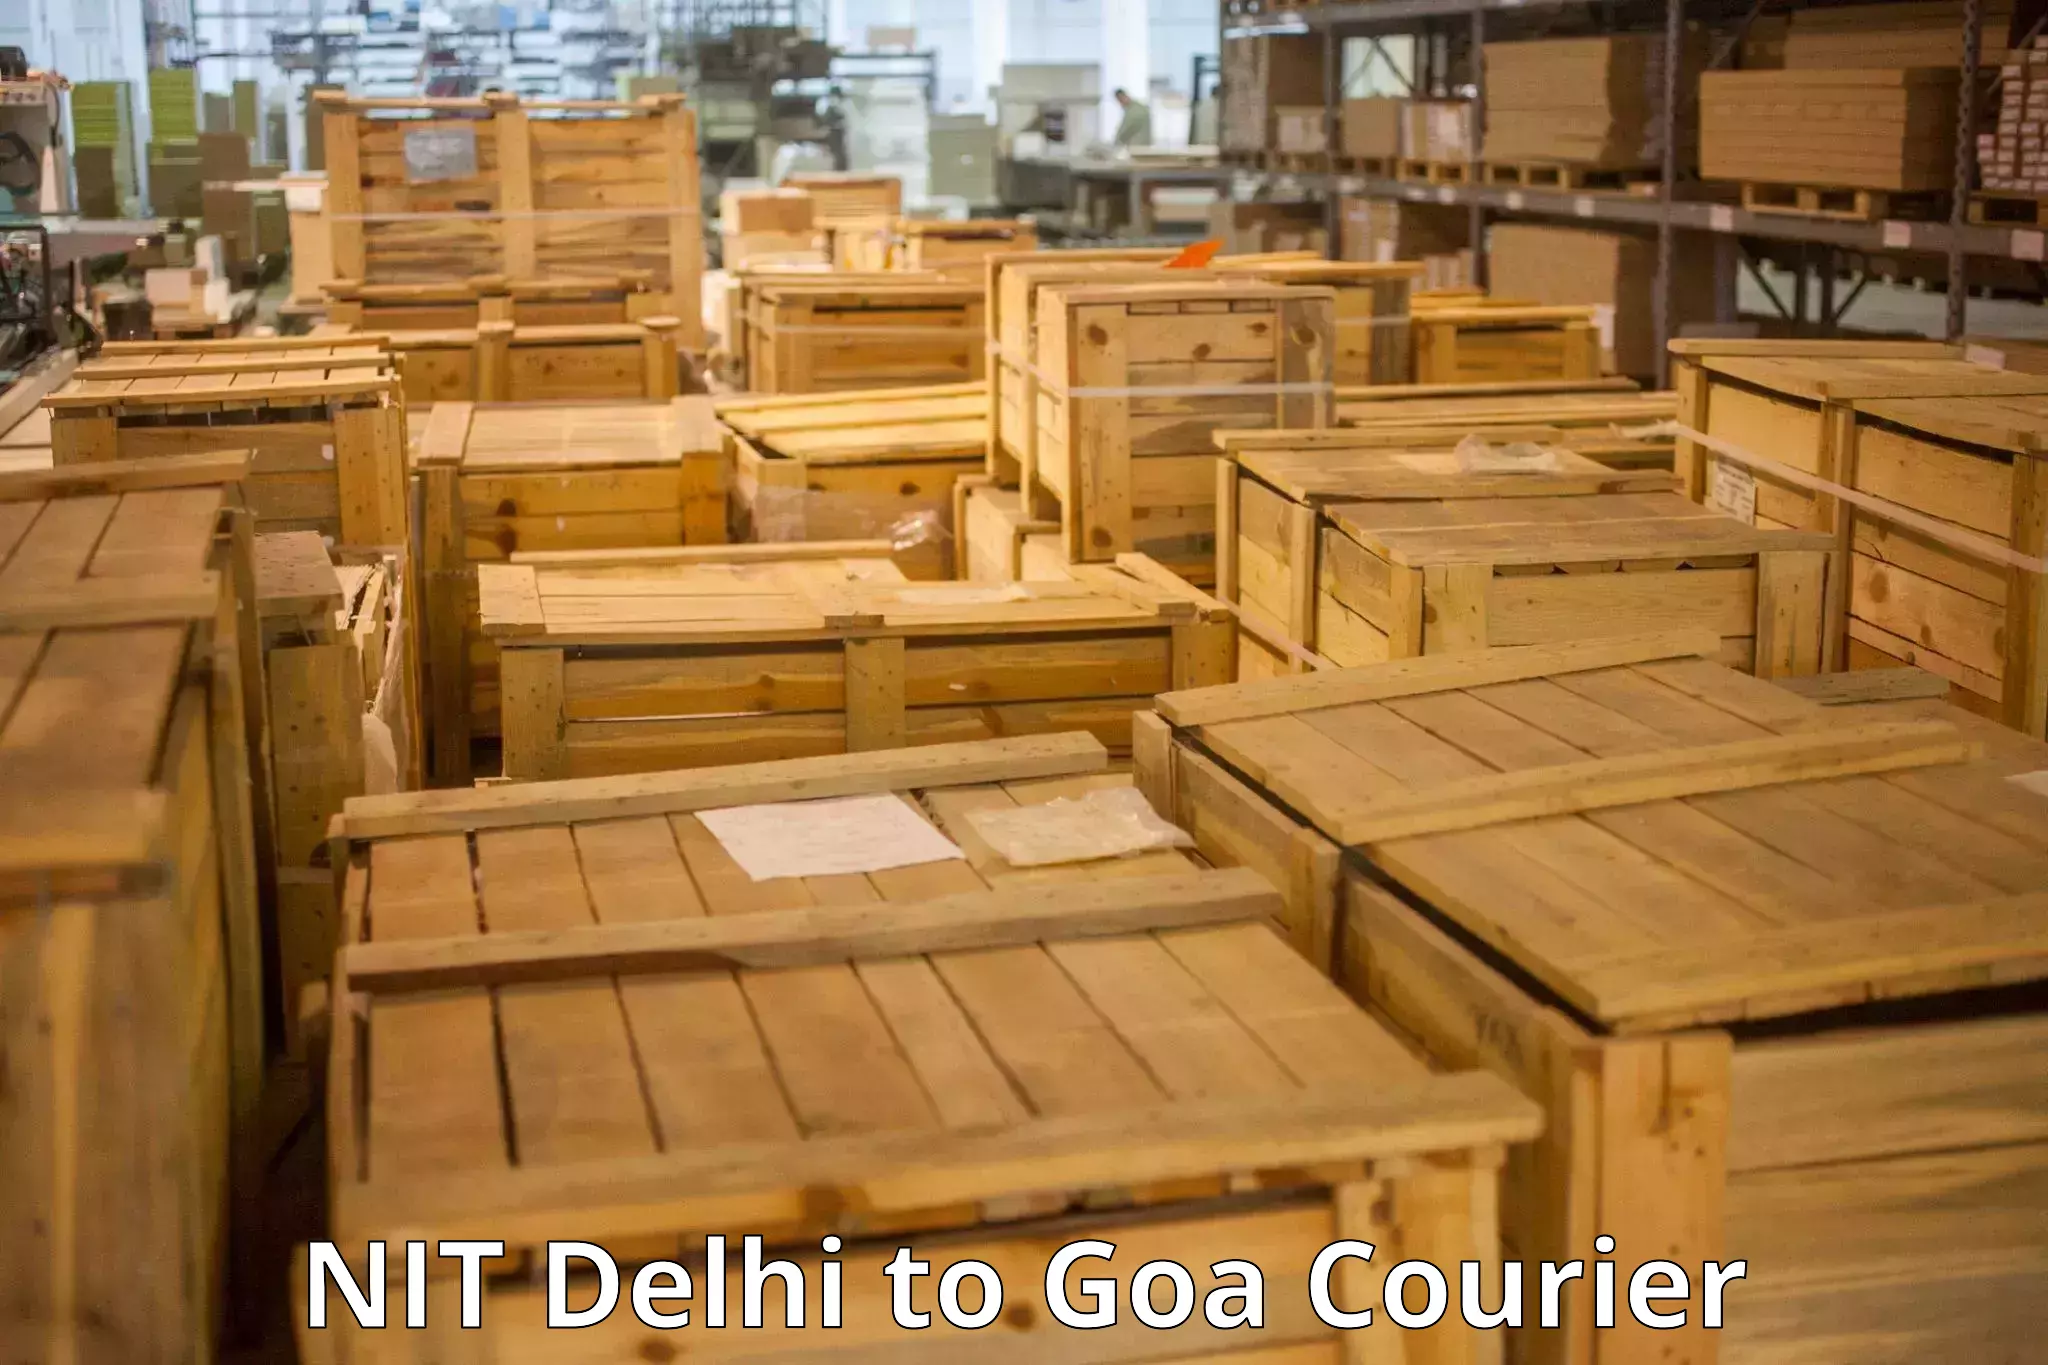 Weekend baggage shipping in NIT Delhi to Goa